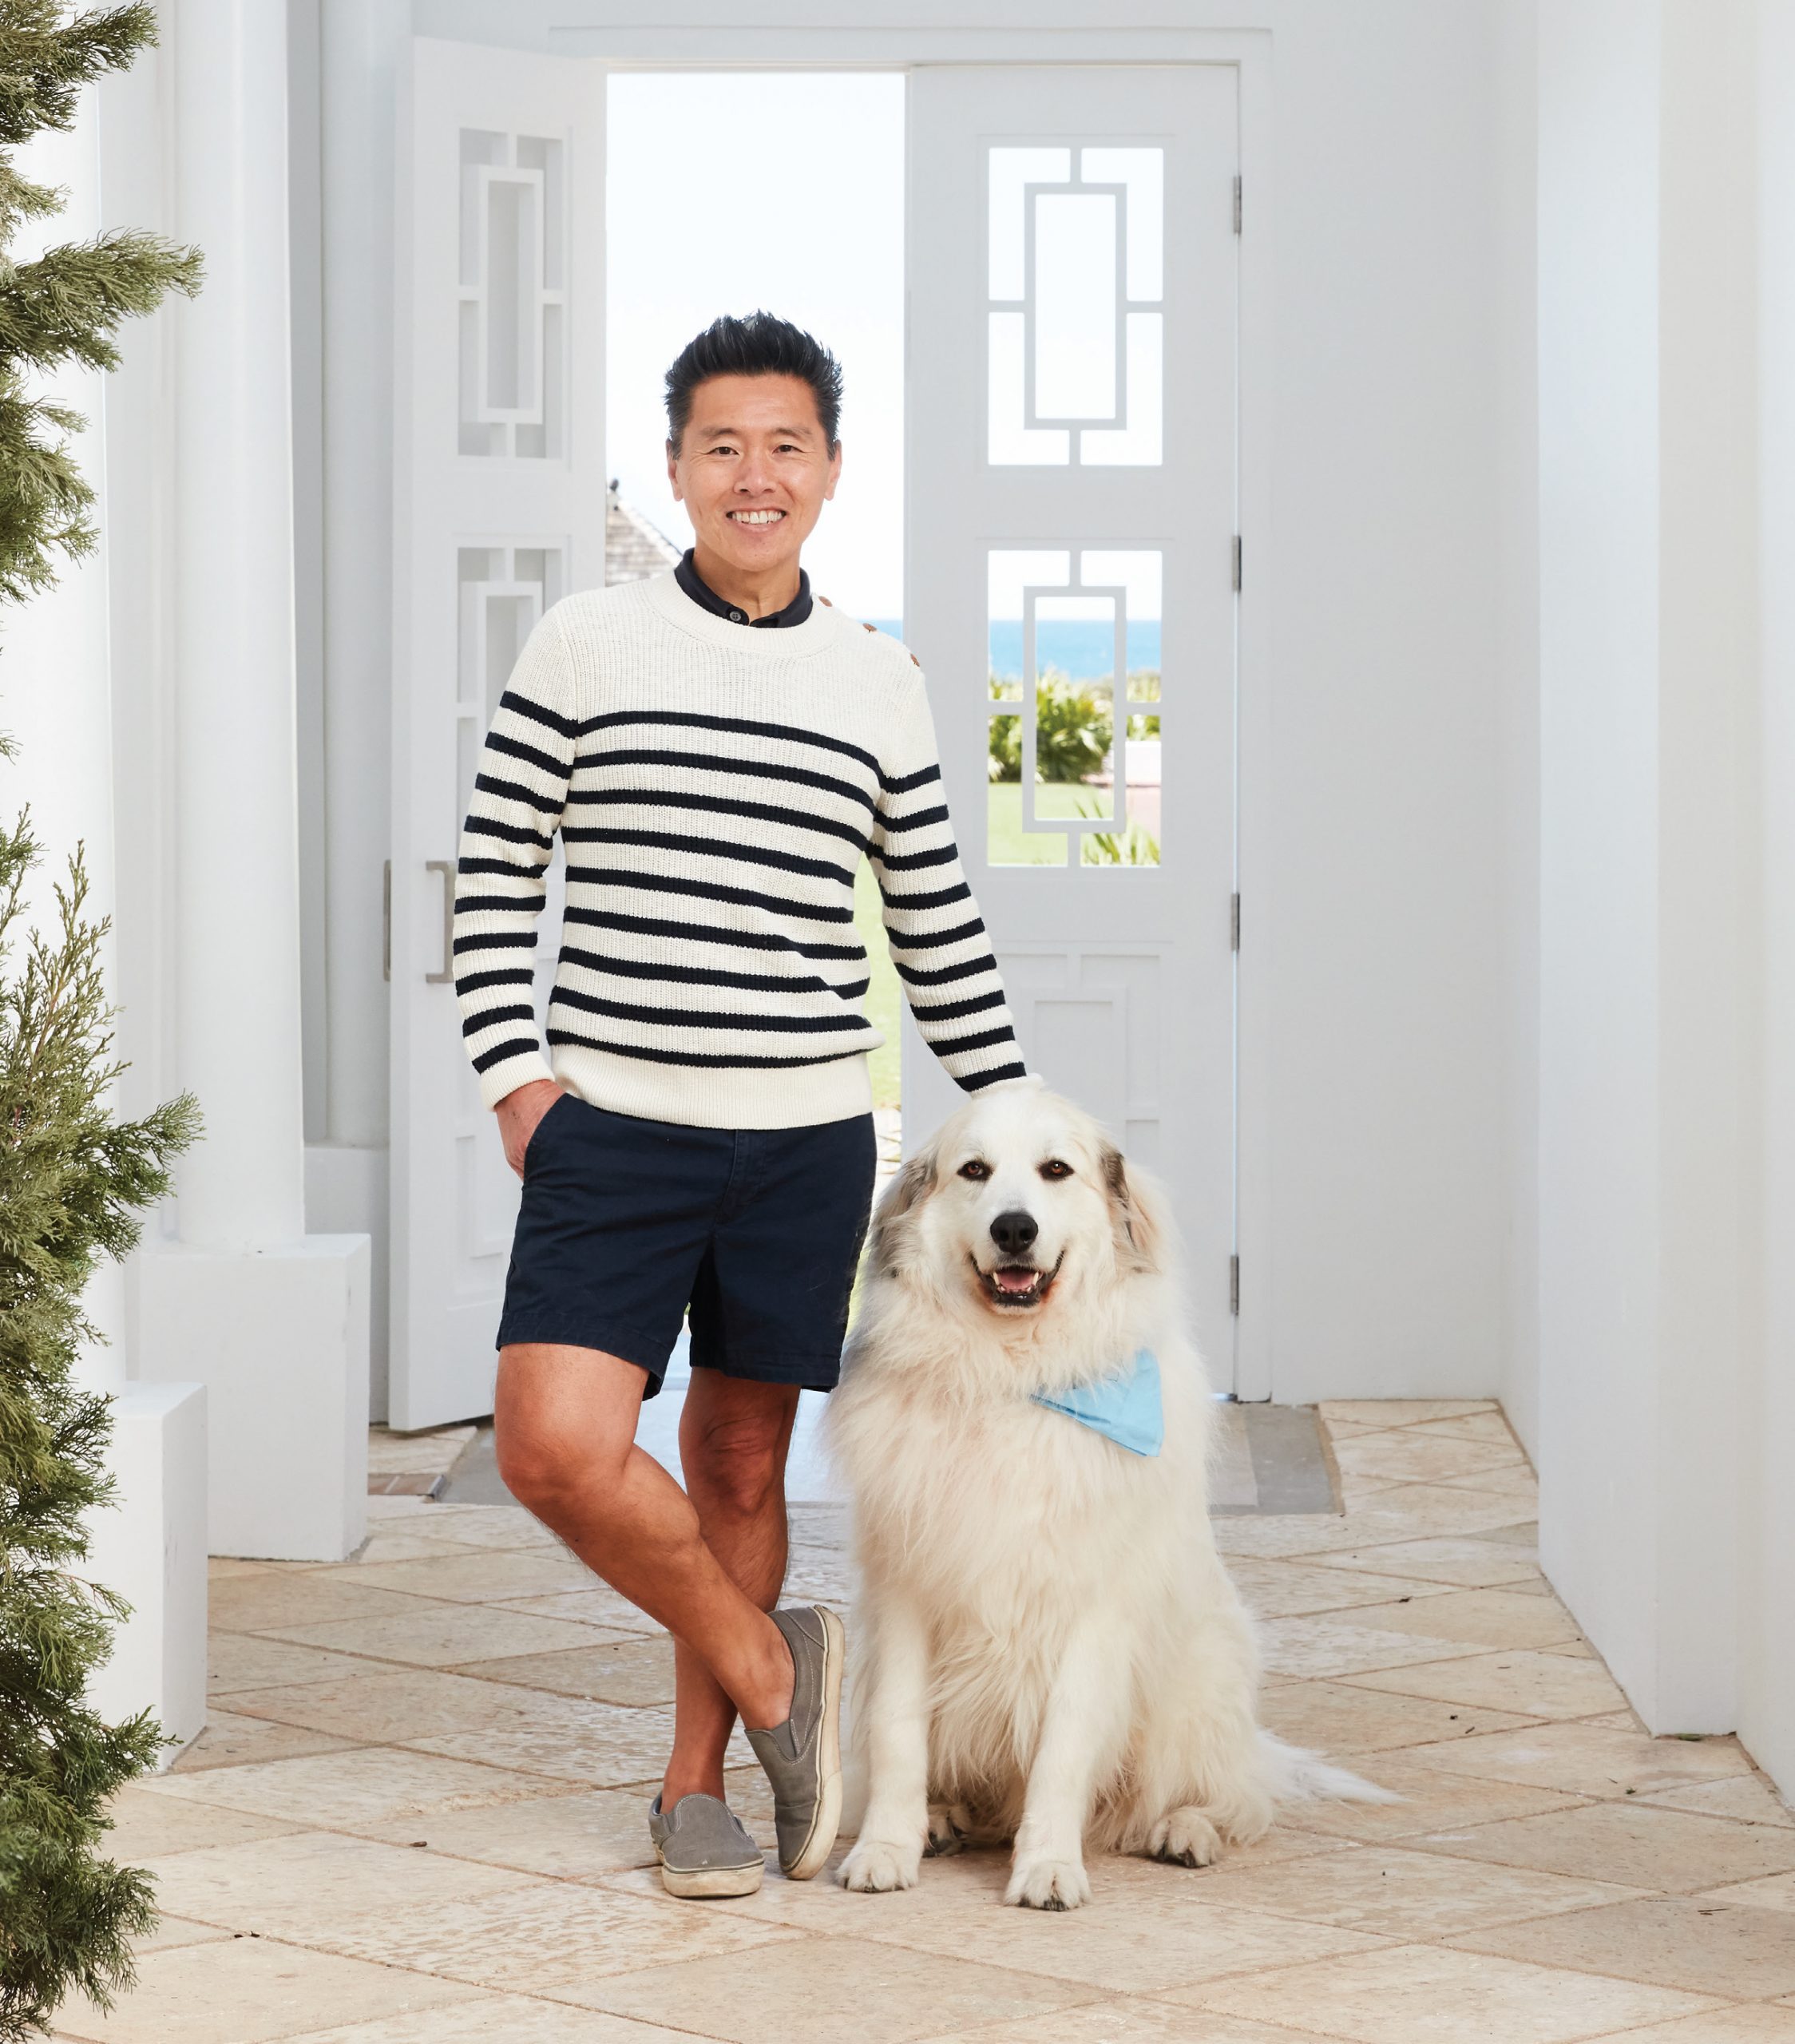 Yip poses in doorway with dog